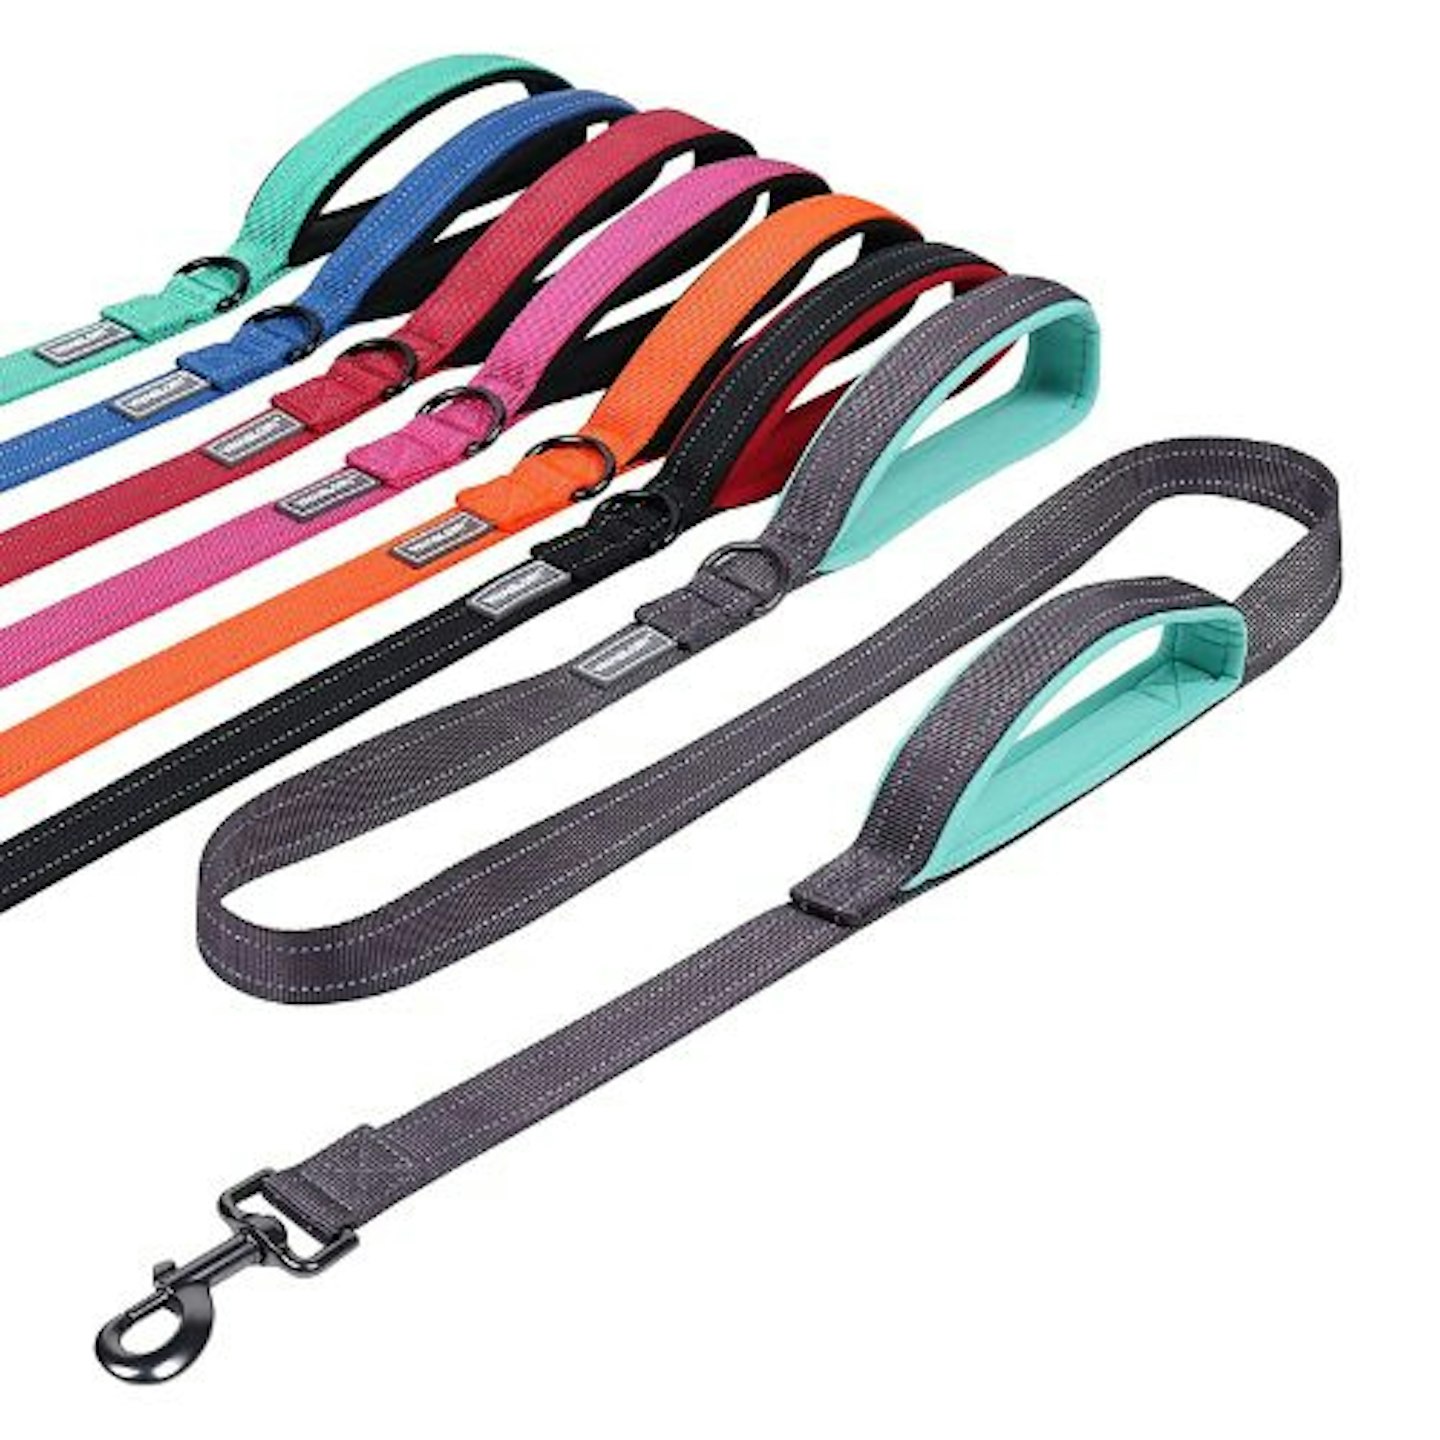  Vivaglory Reflective Dog Lead with Padded Handle